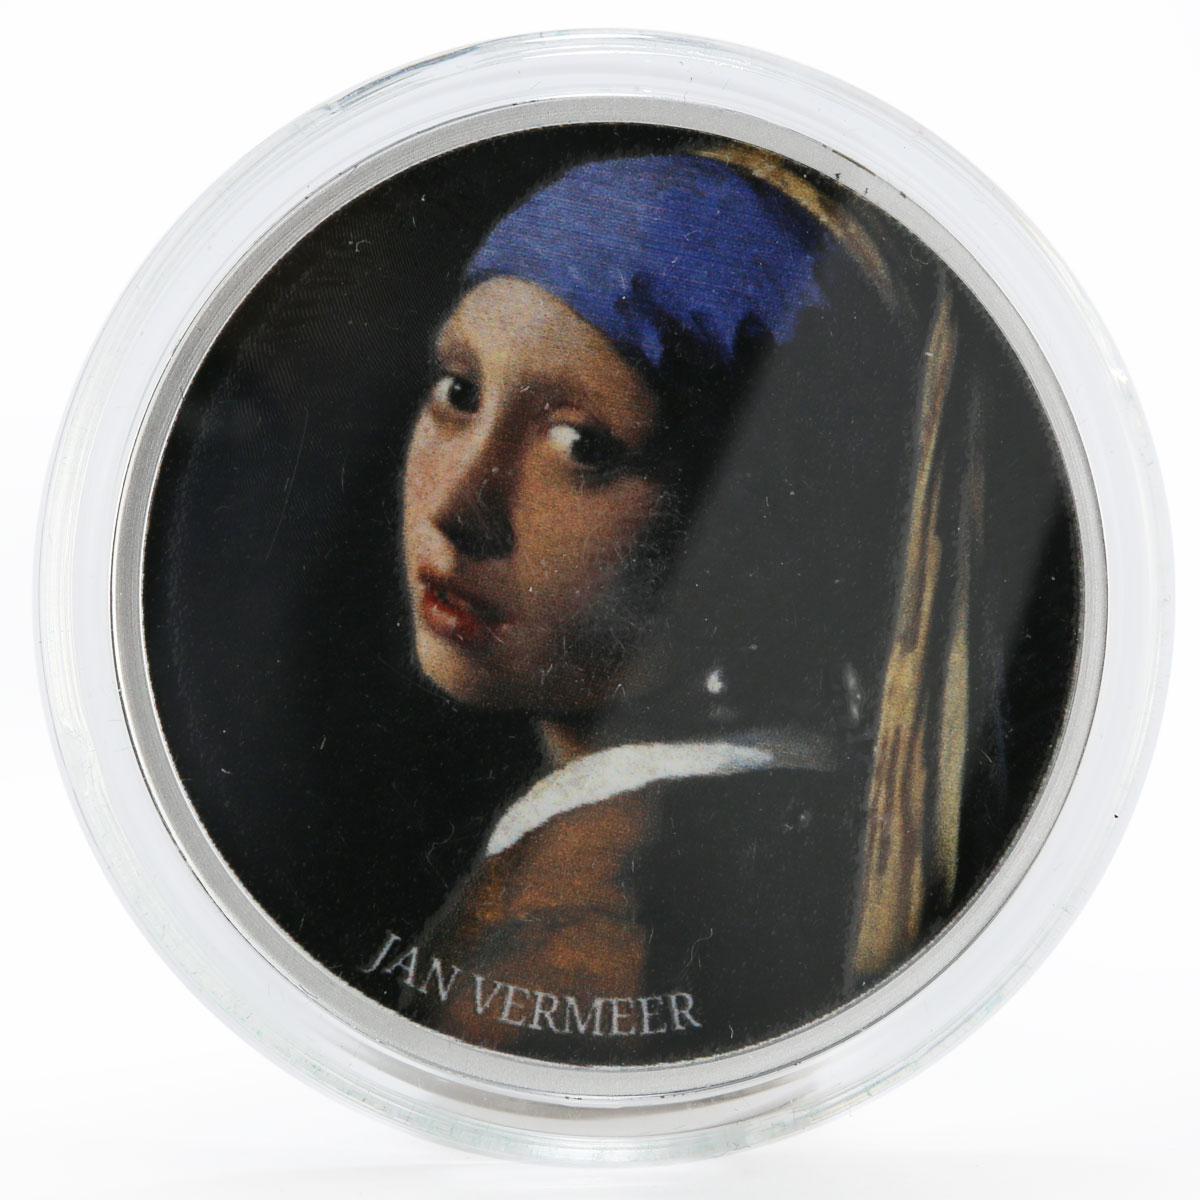 Cameroon 500 francs Girl Pearl Earring Vermeer colored proof silver coin 2017